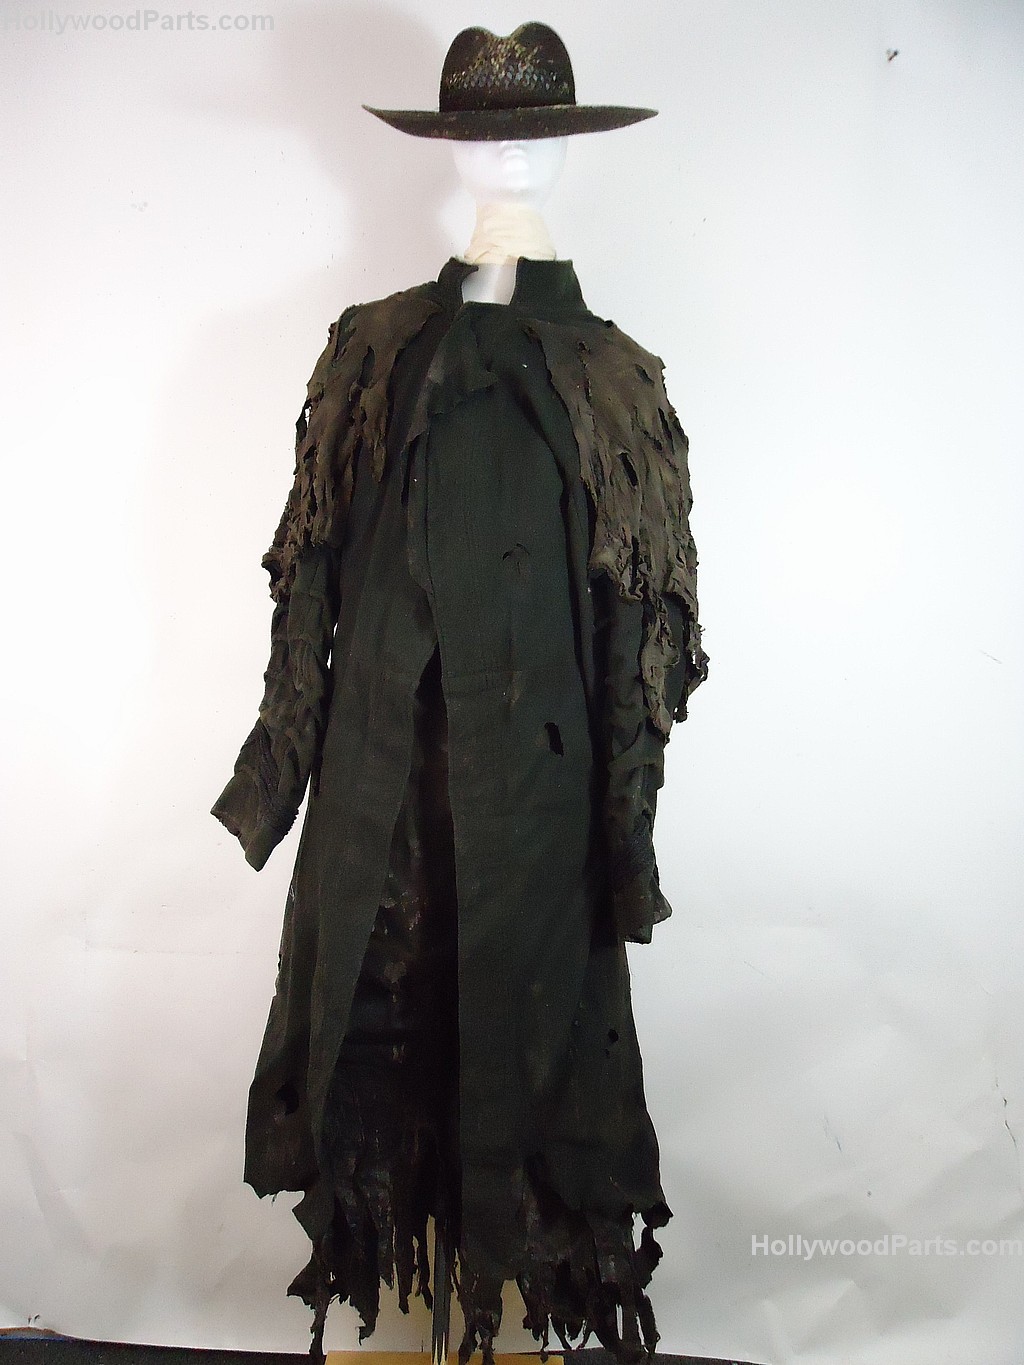 Above is the Jeepers Creepers 2 scarecrow dummy costume. 